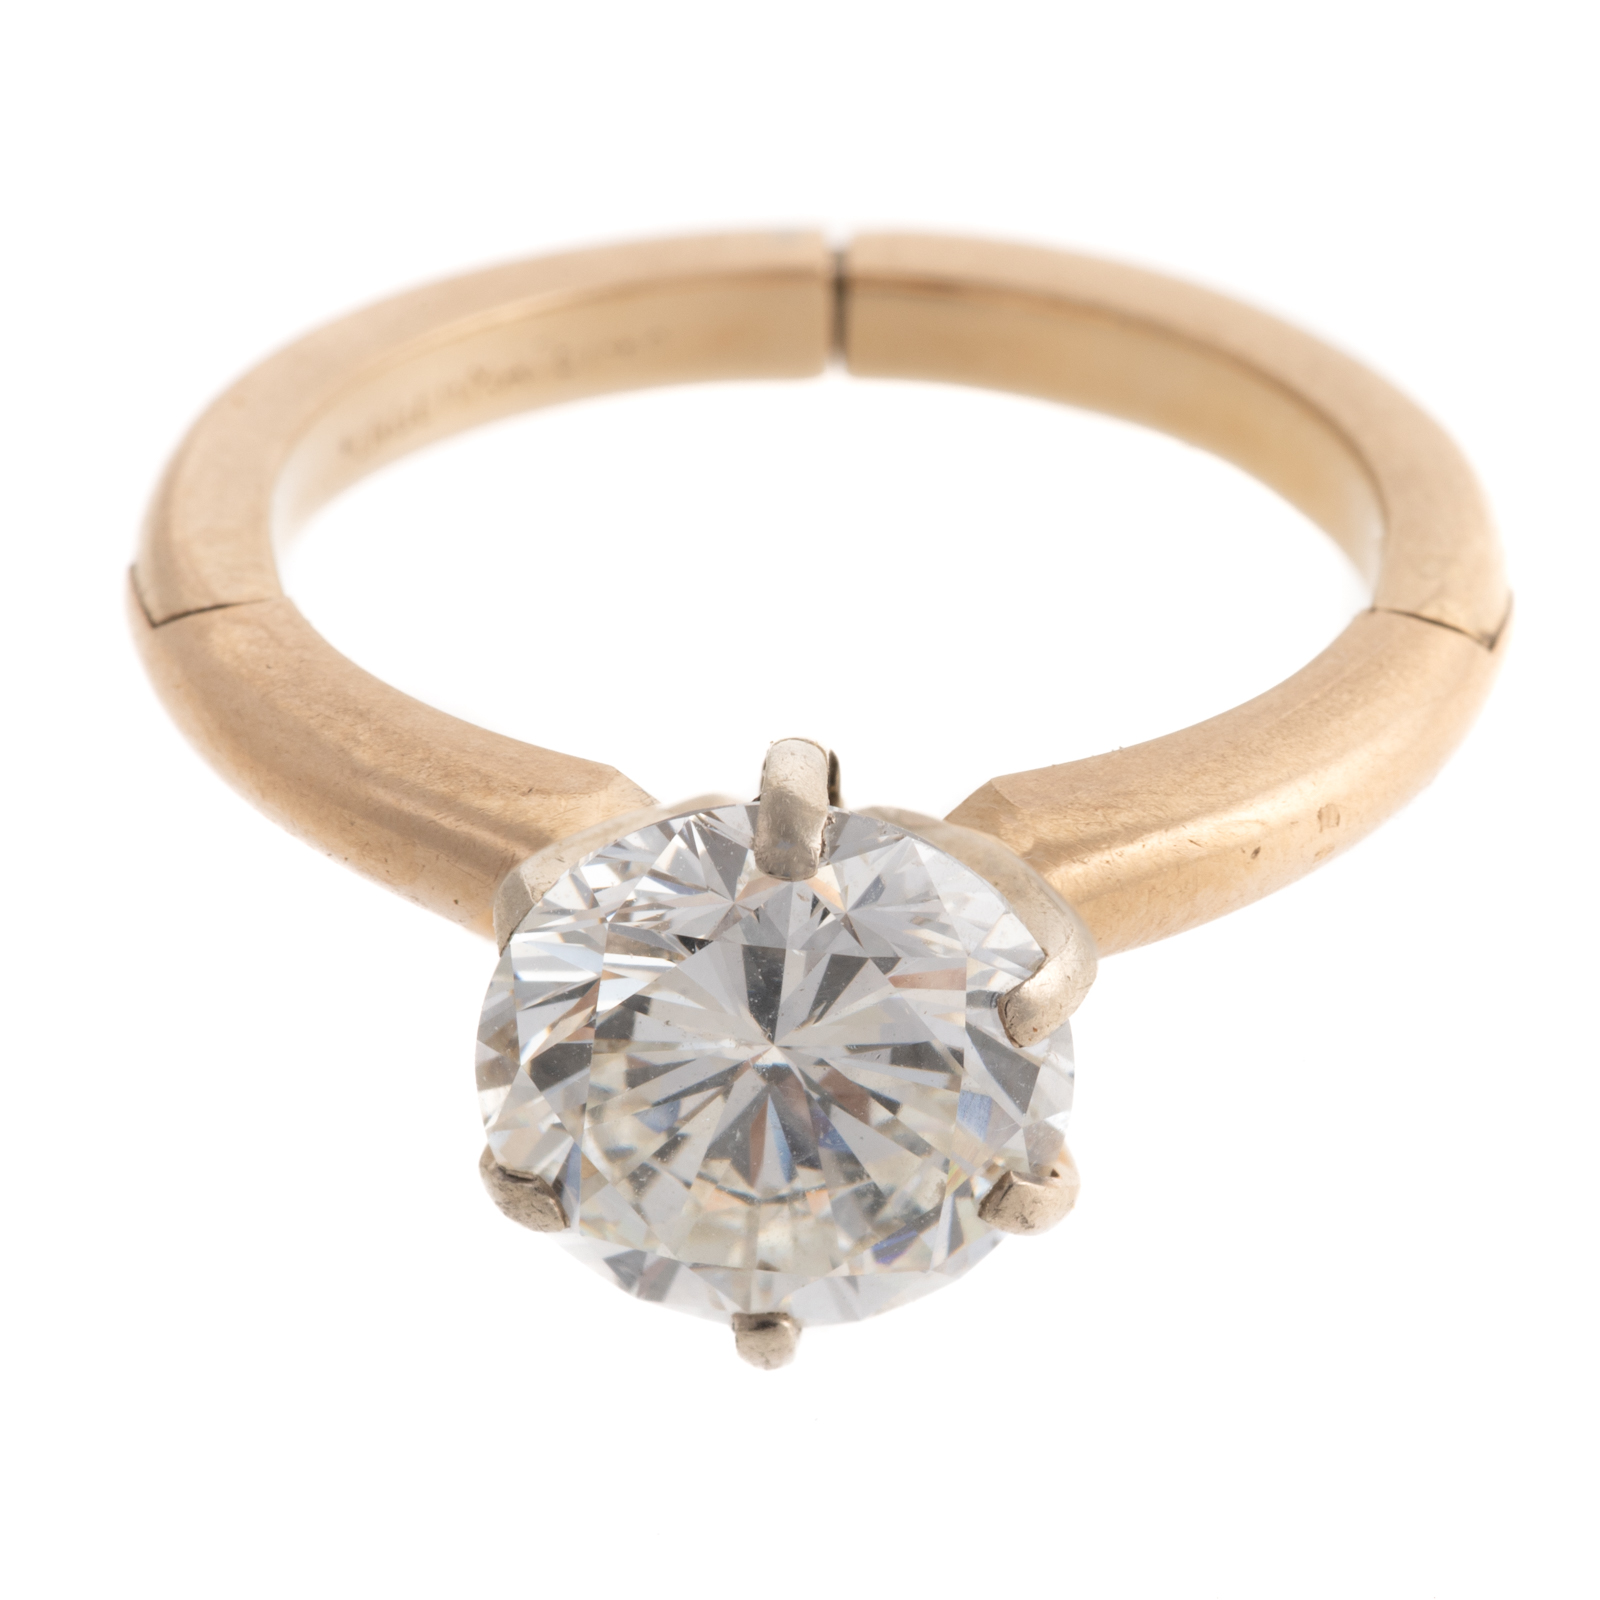 A 2 52 CT SOLITAIRE DIAMOND RING 29df5c